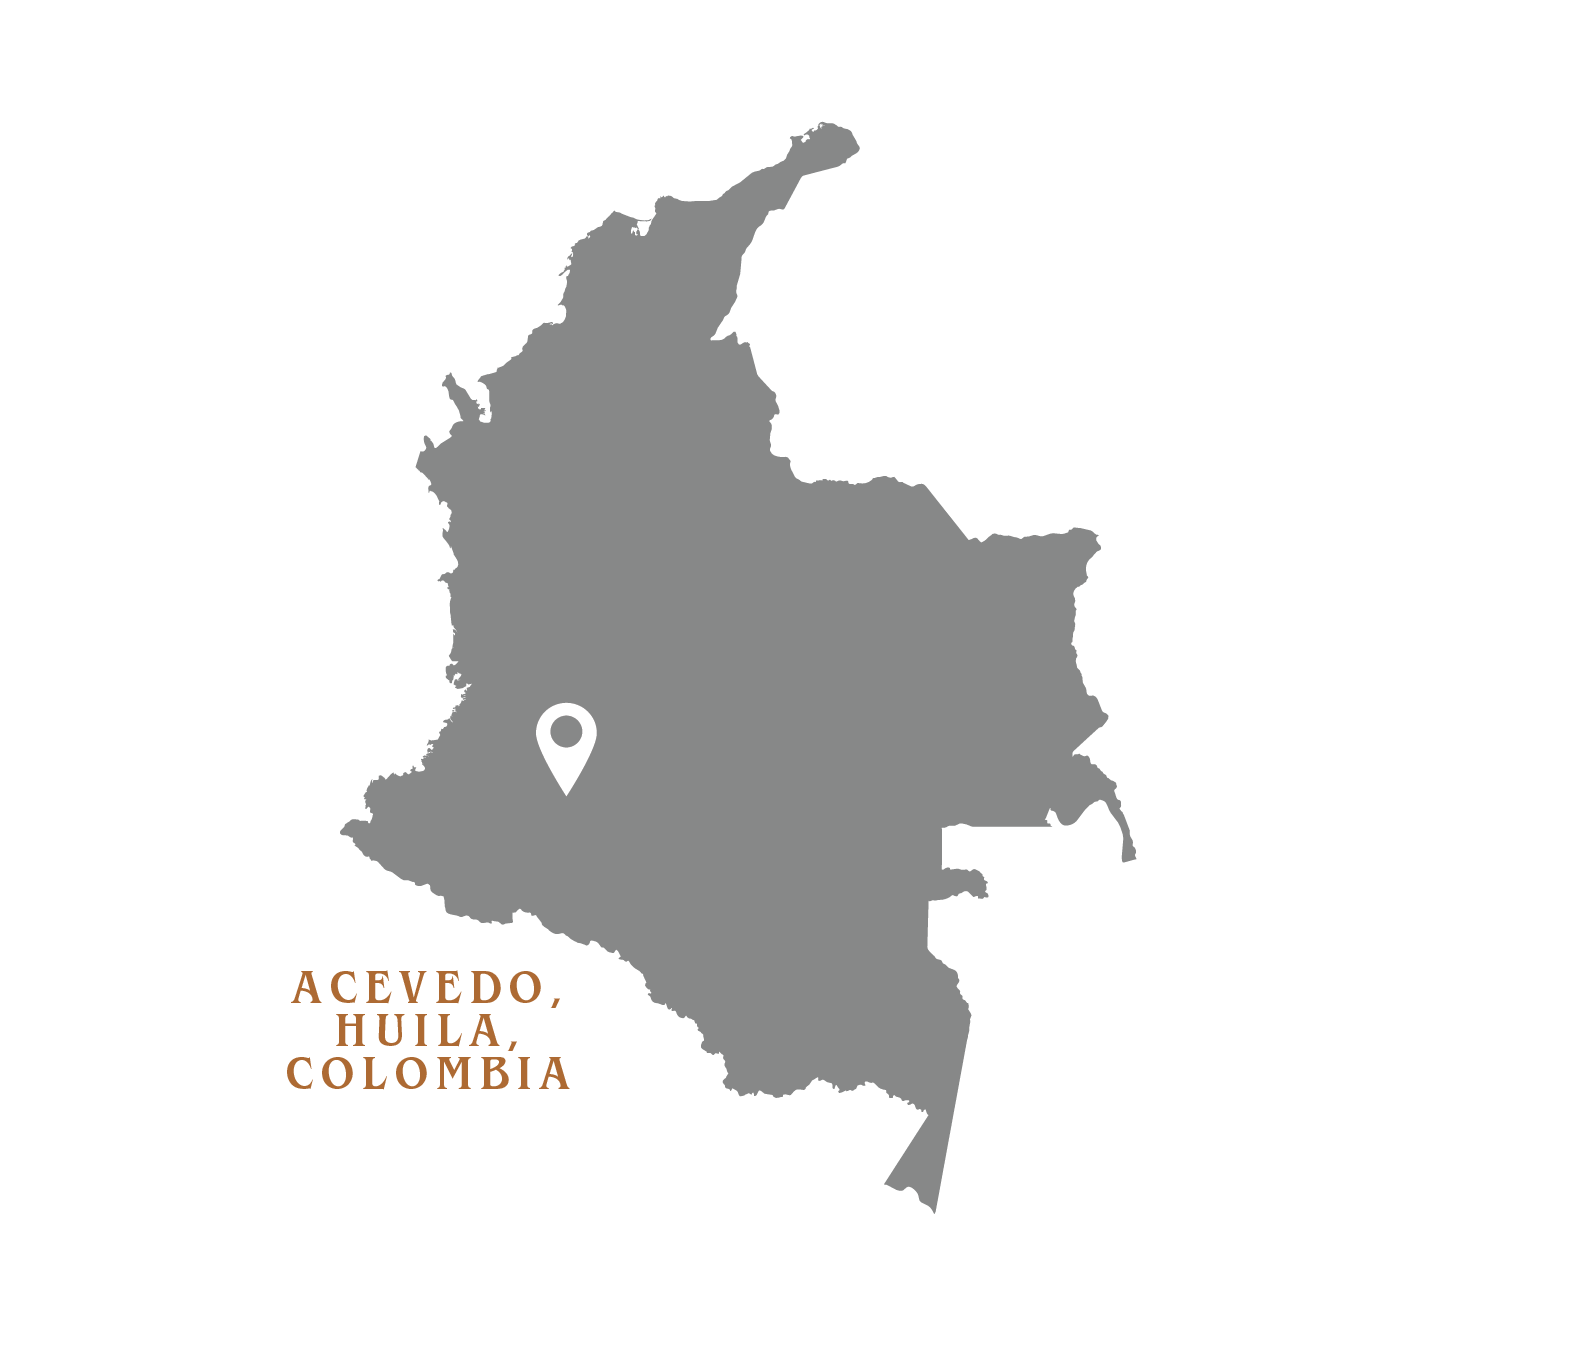 Map of Colombia indicating the location of the farm